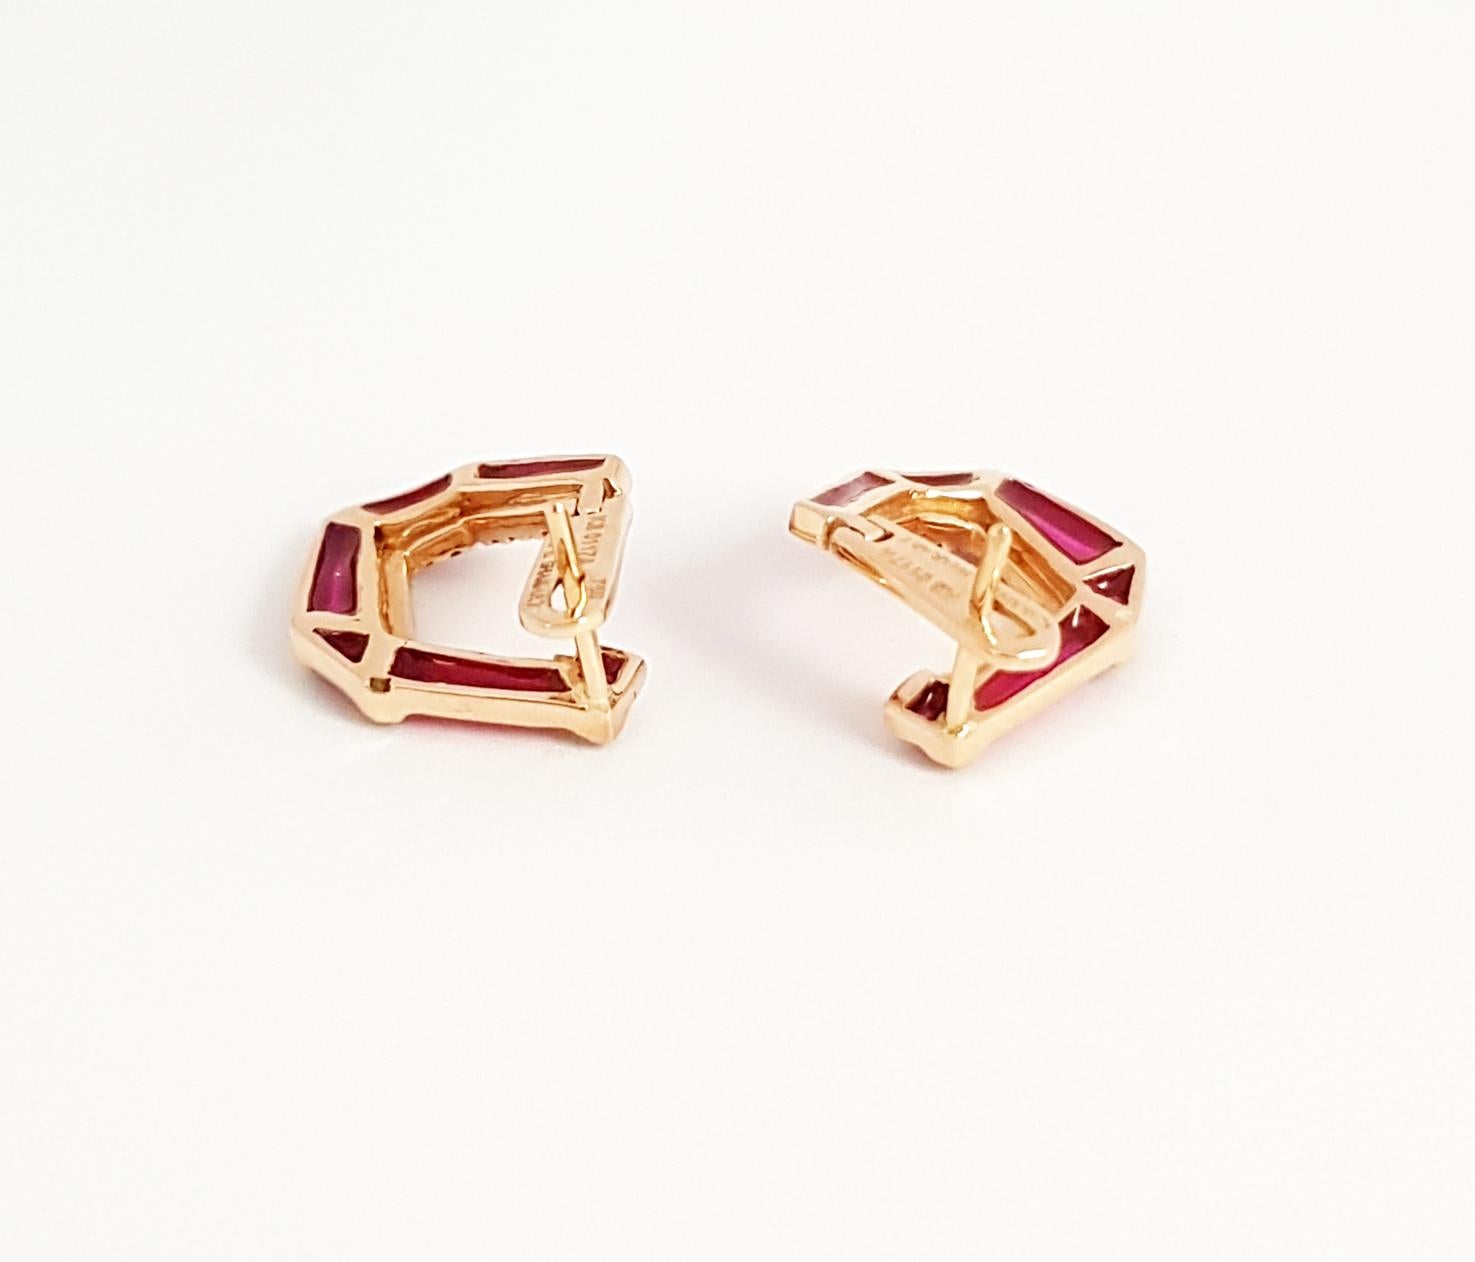 Origami Link No. 5 Ruby with Enamel Earrings 18K Rose Gold Petite For Sale 2